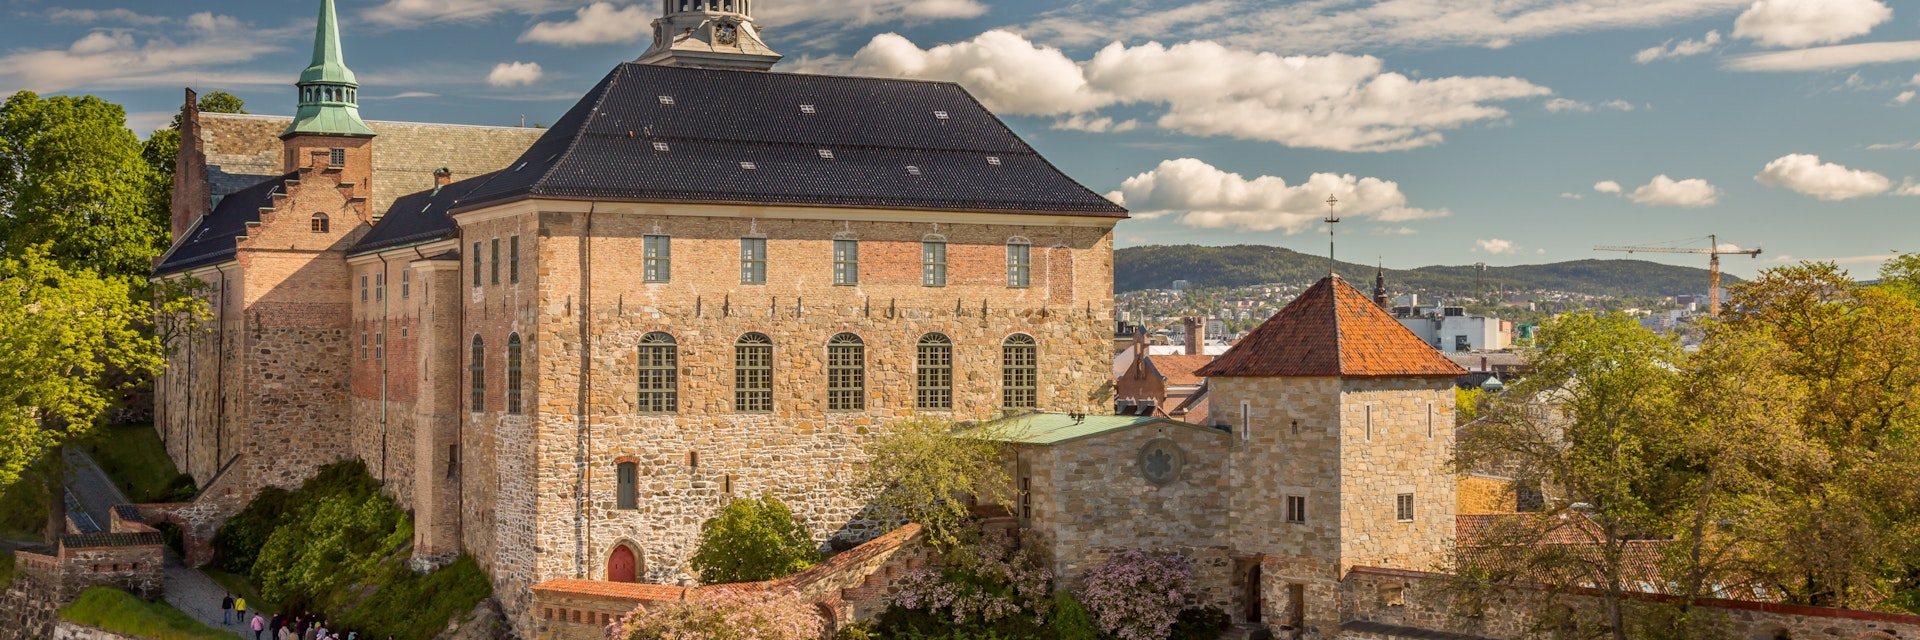 Akershus Fortress Oslo Norway; Shutterstock ID 553892116; Your name (First / Last): Gemma Graham; GL account no.: 65050; Netsuite department name: Online Editorial; Full Product or Project name including edition: BiT Destination Page Images